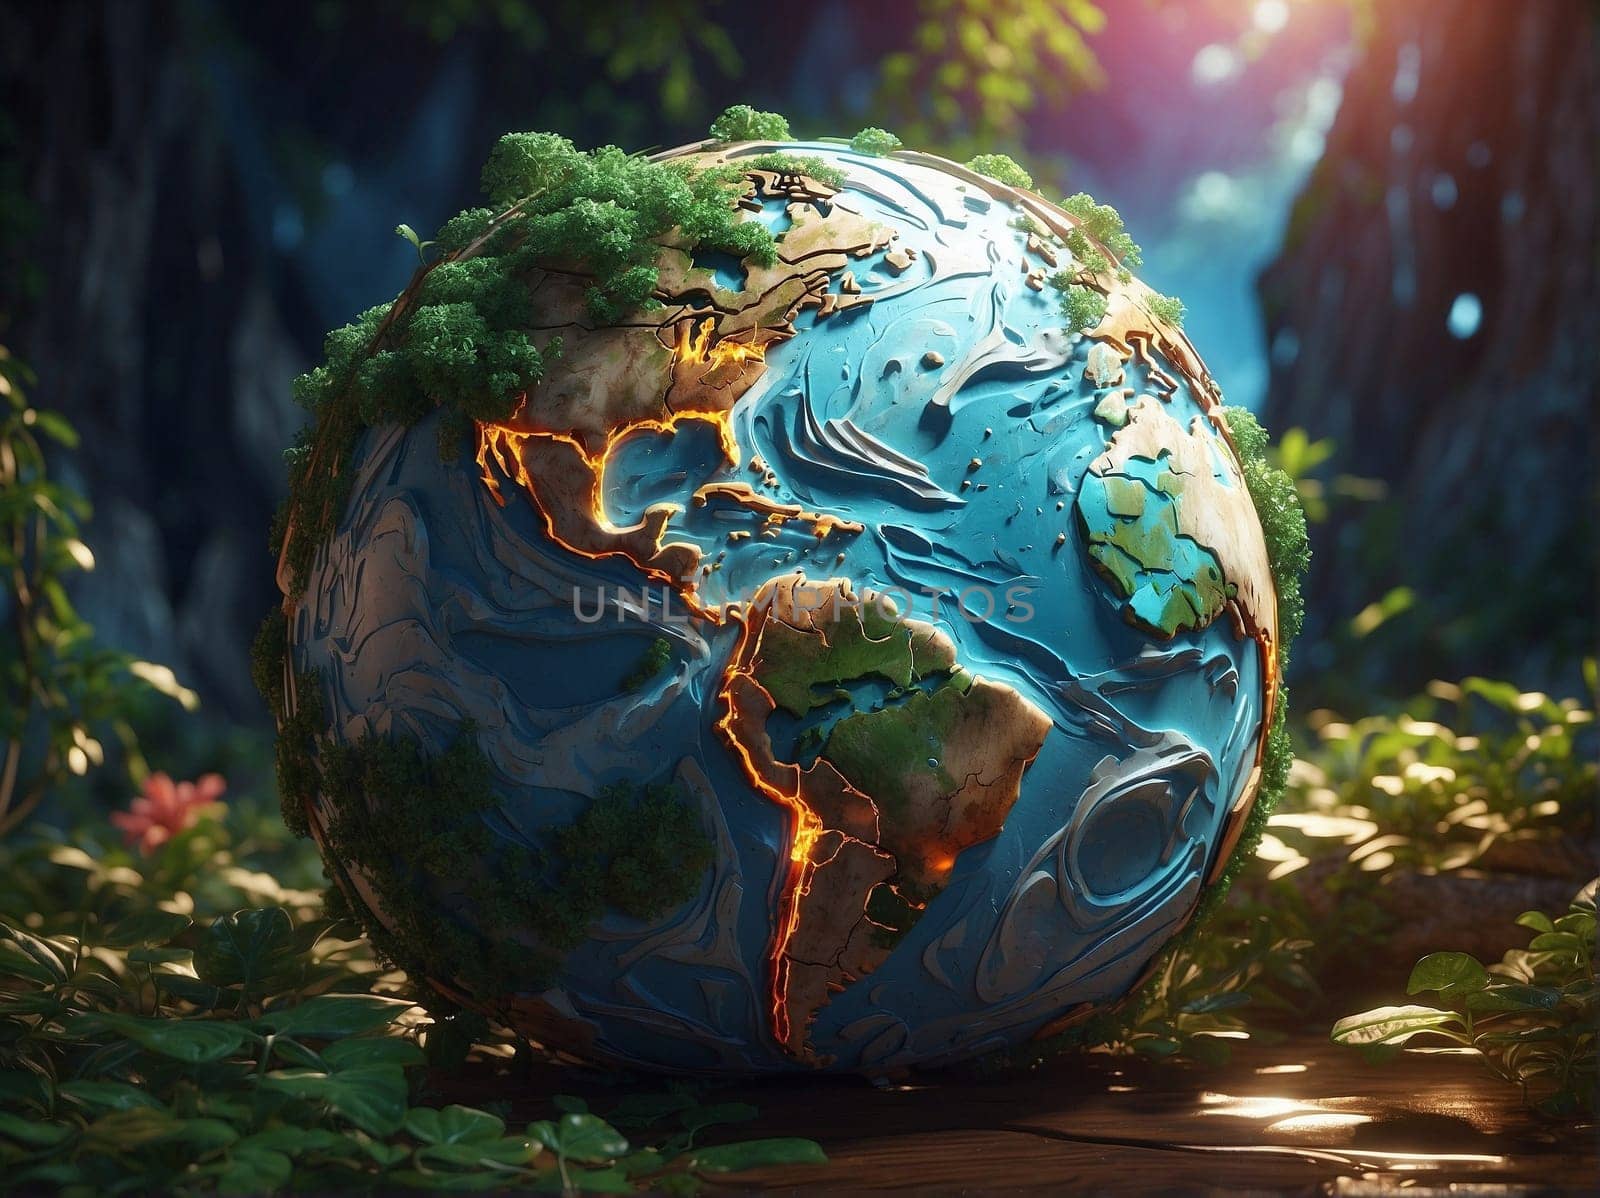 A blue and green globe sits amongst the trees in a forest.